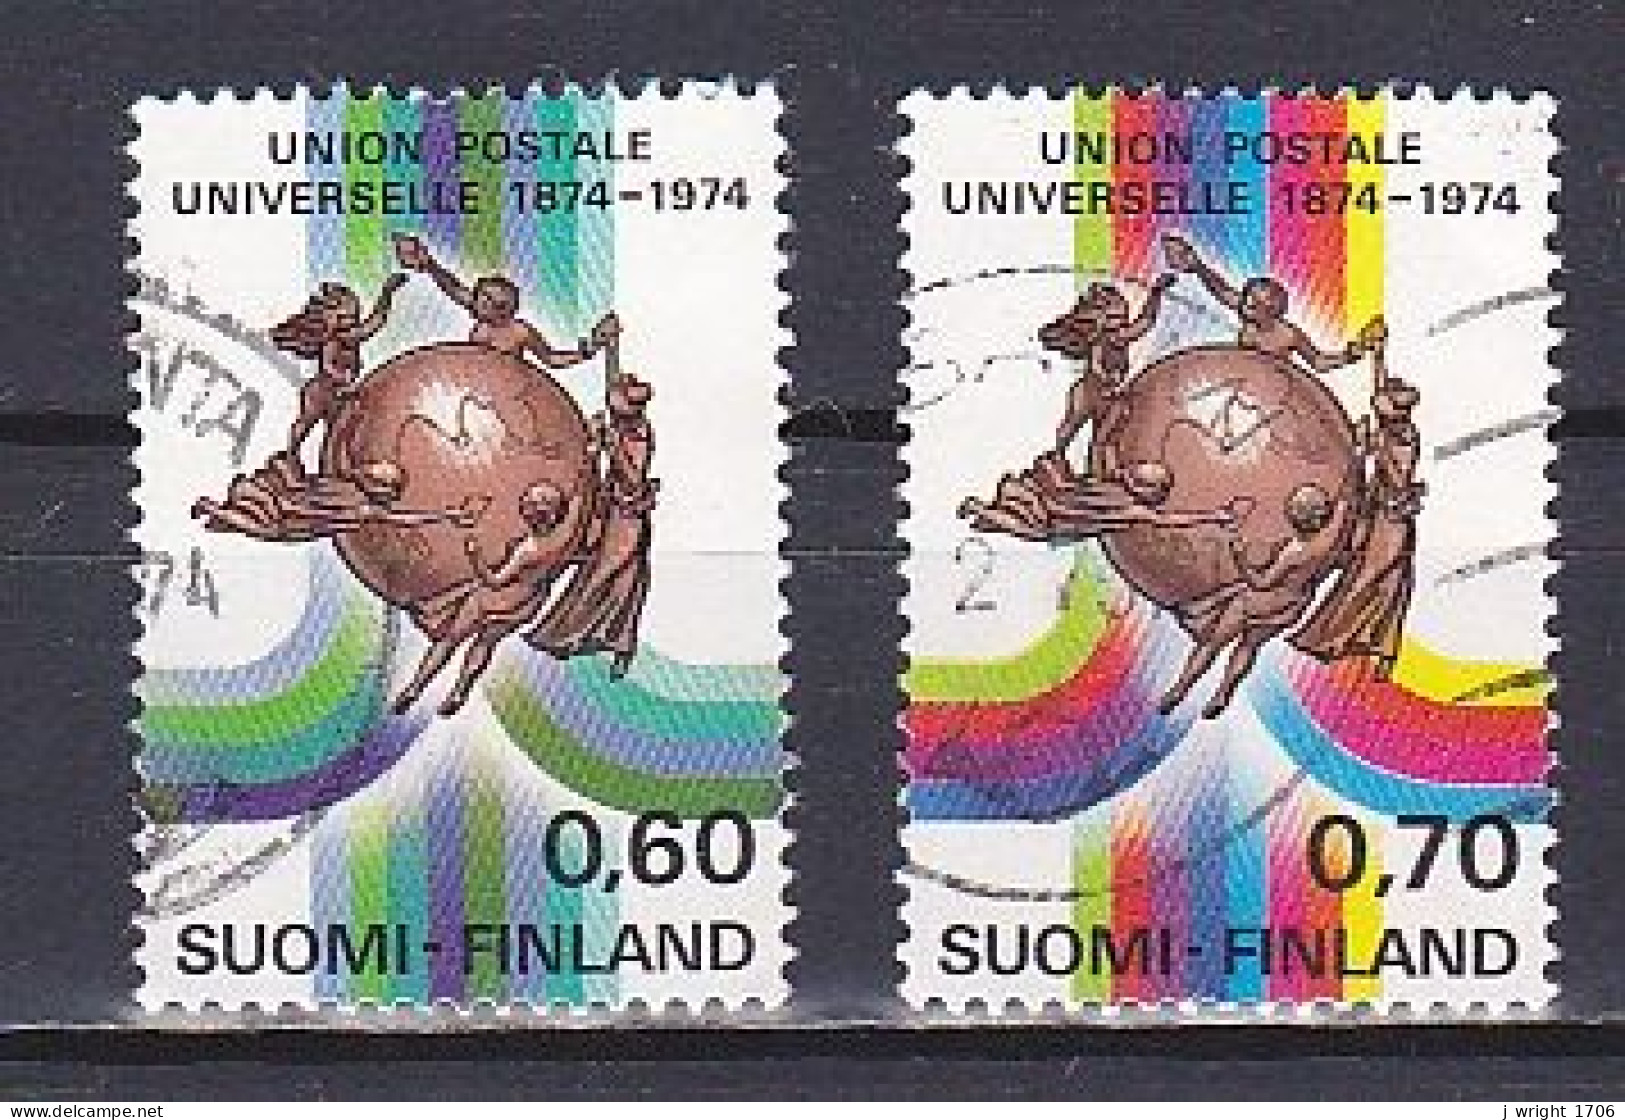 Finland, 1974, UPU Centenary, Set, USED - Used Stamps